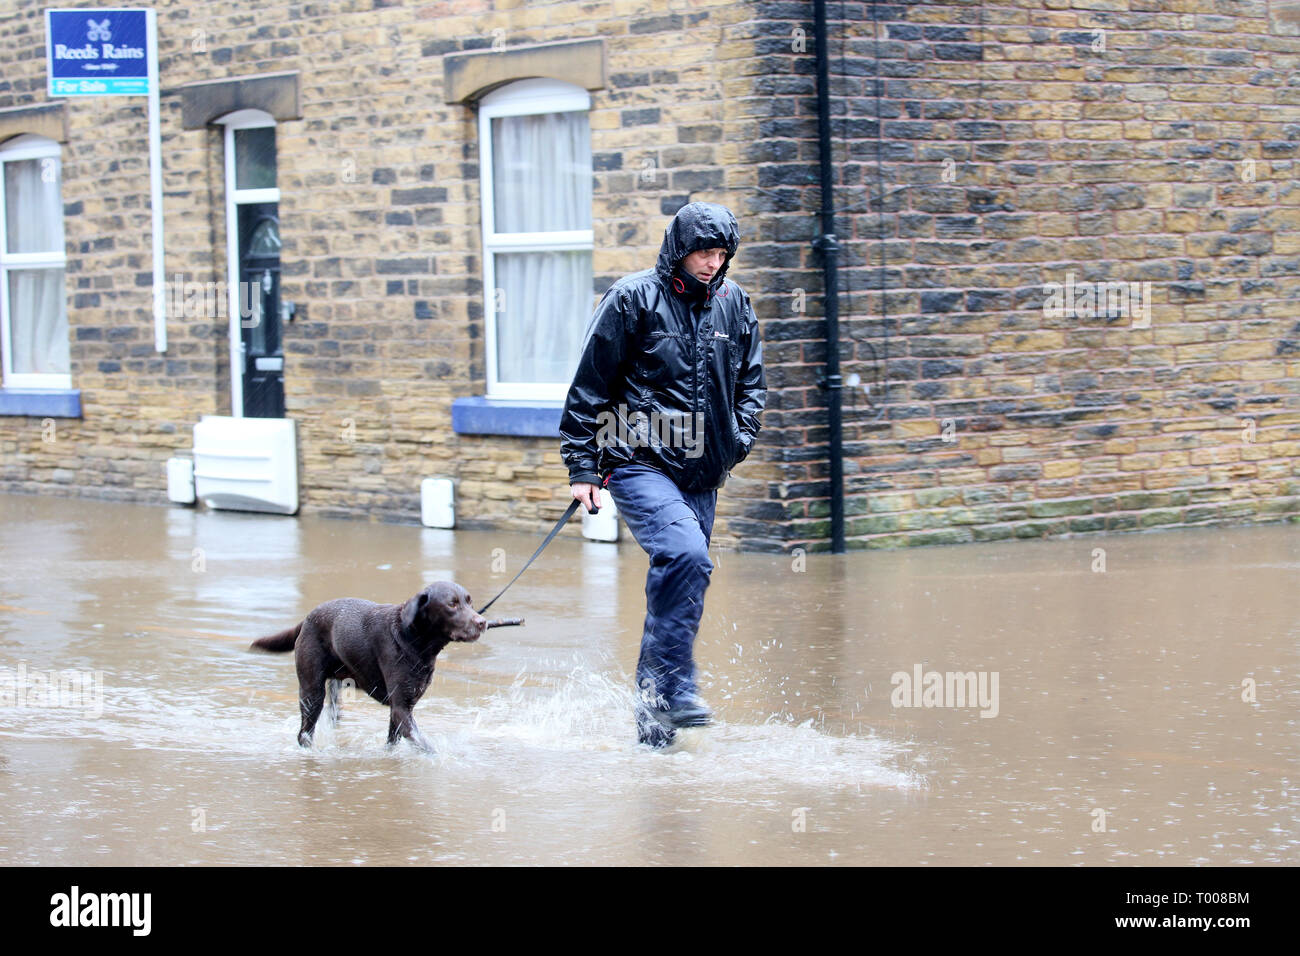 Walsden,Todmorden, Calderdale, UK. 16th March 2019. A dog been walked during heavy rainfall which has caused flooding in the Calder Valley. Walsden,Todmorden, Calderdale, UK, 16th March 2019 (C)Barbara Cook/Alamy Live News Credit: Barbara Cook/Alamy Live News Stock Photo